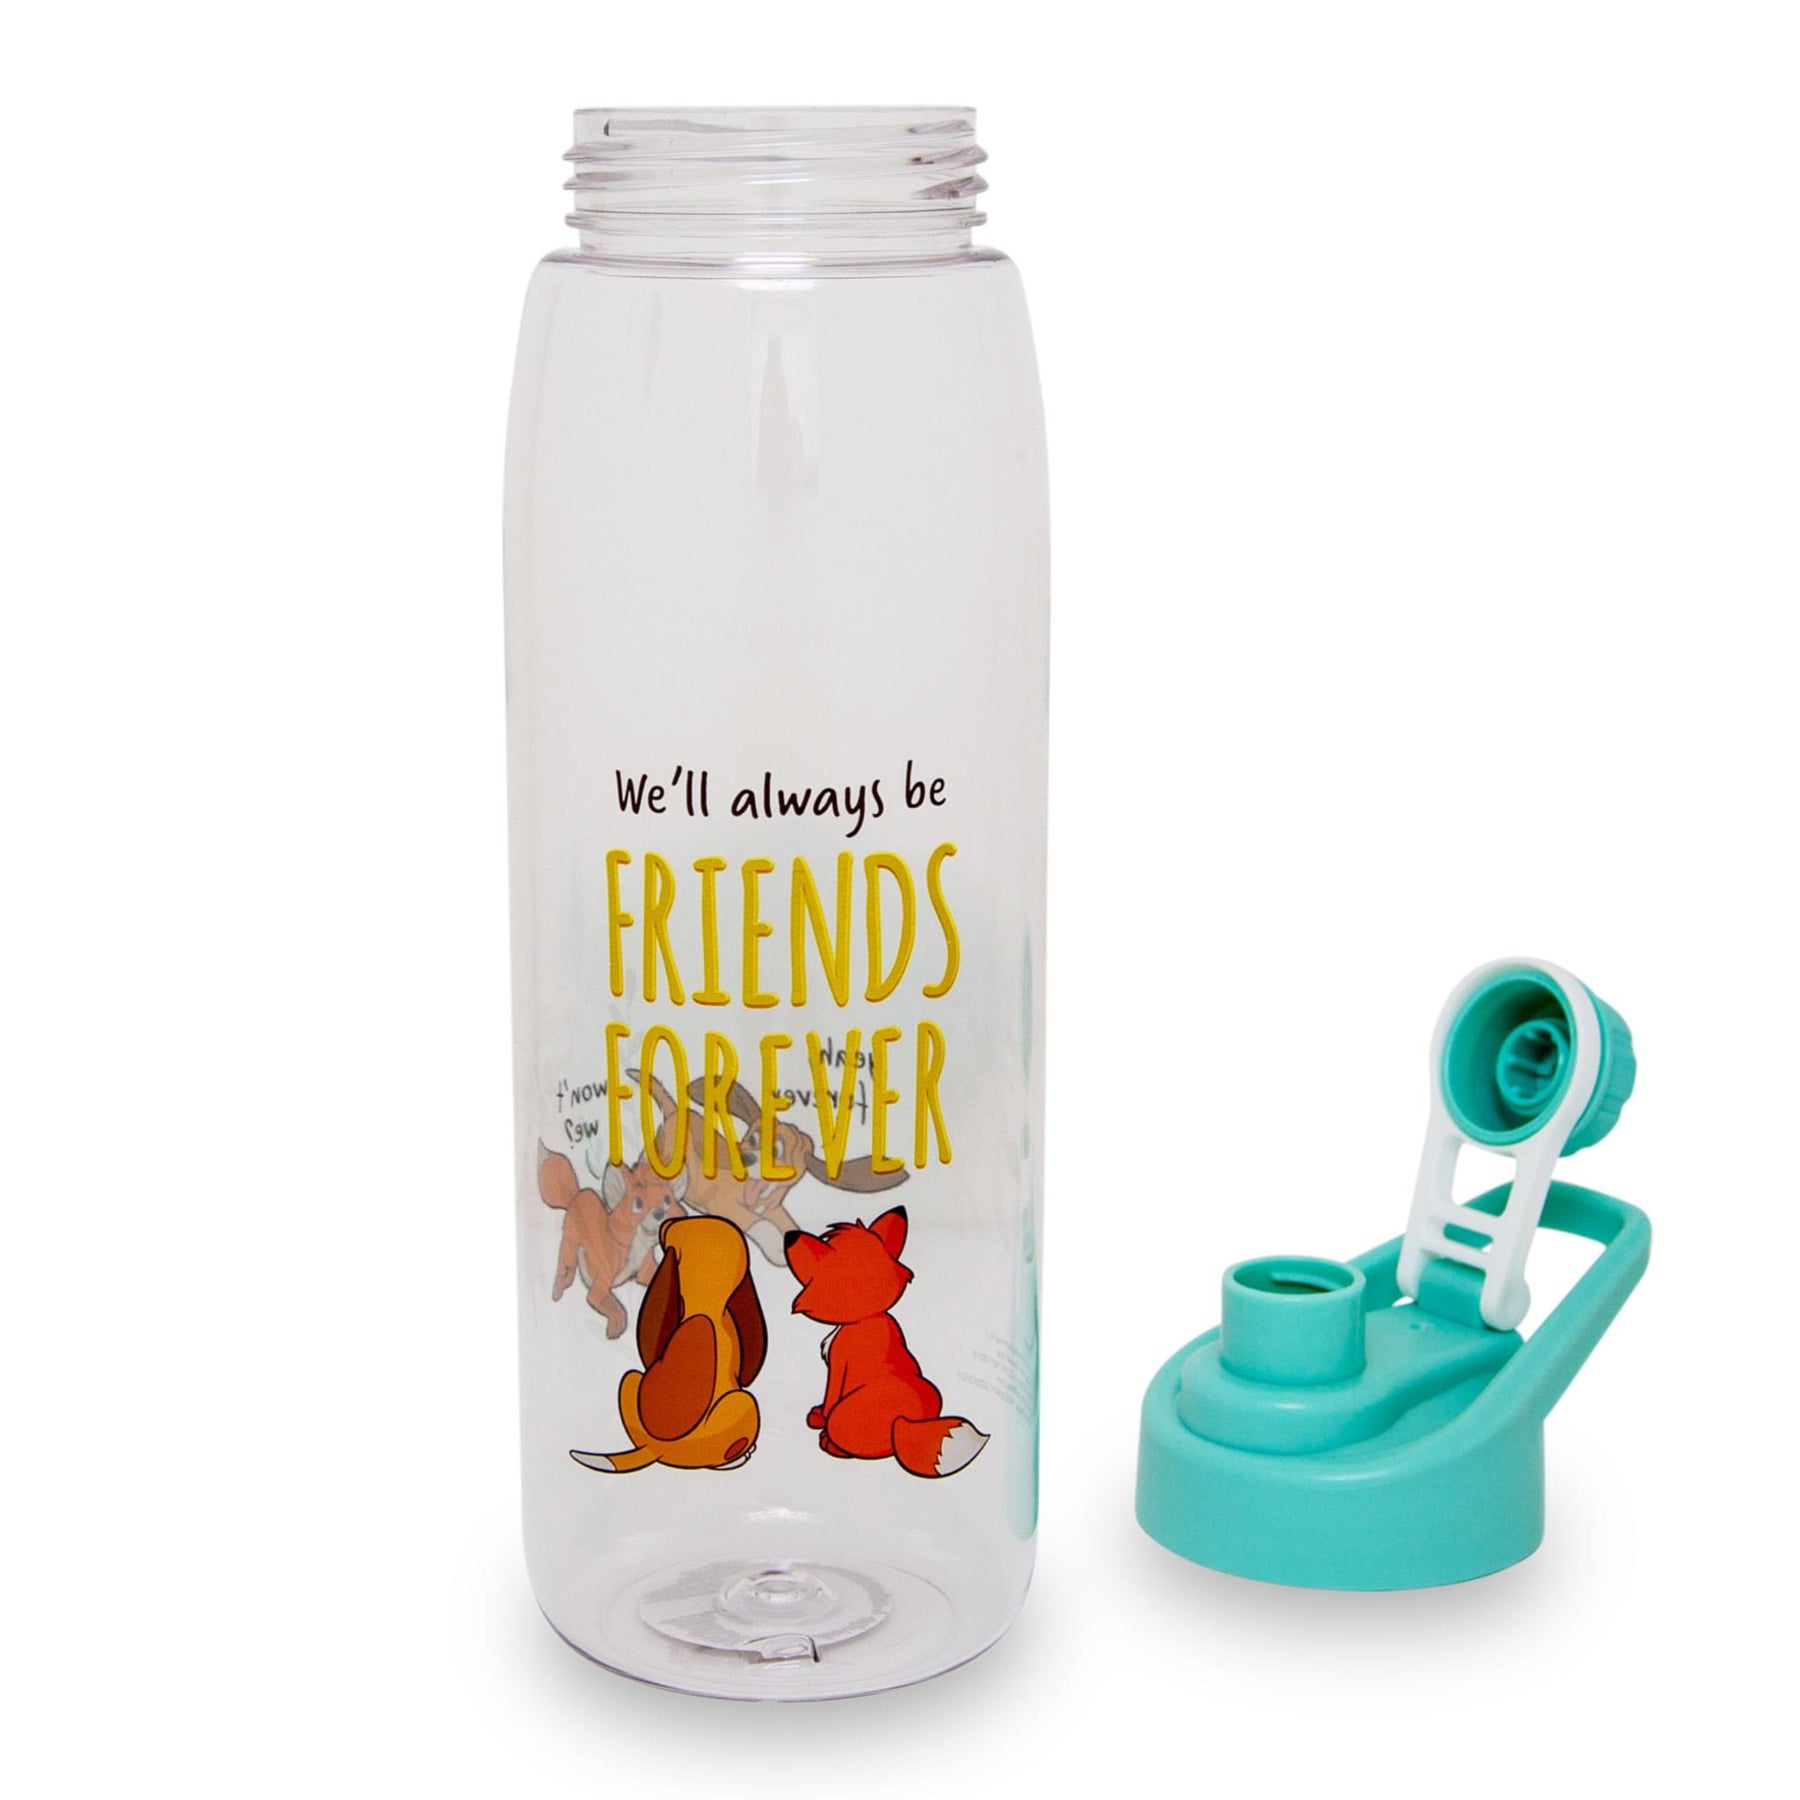 Disney Fox and the Hound "Friends Forever" Water Bottle with Lid | 28 Ounces